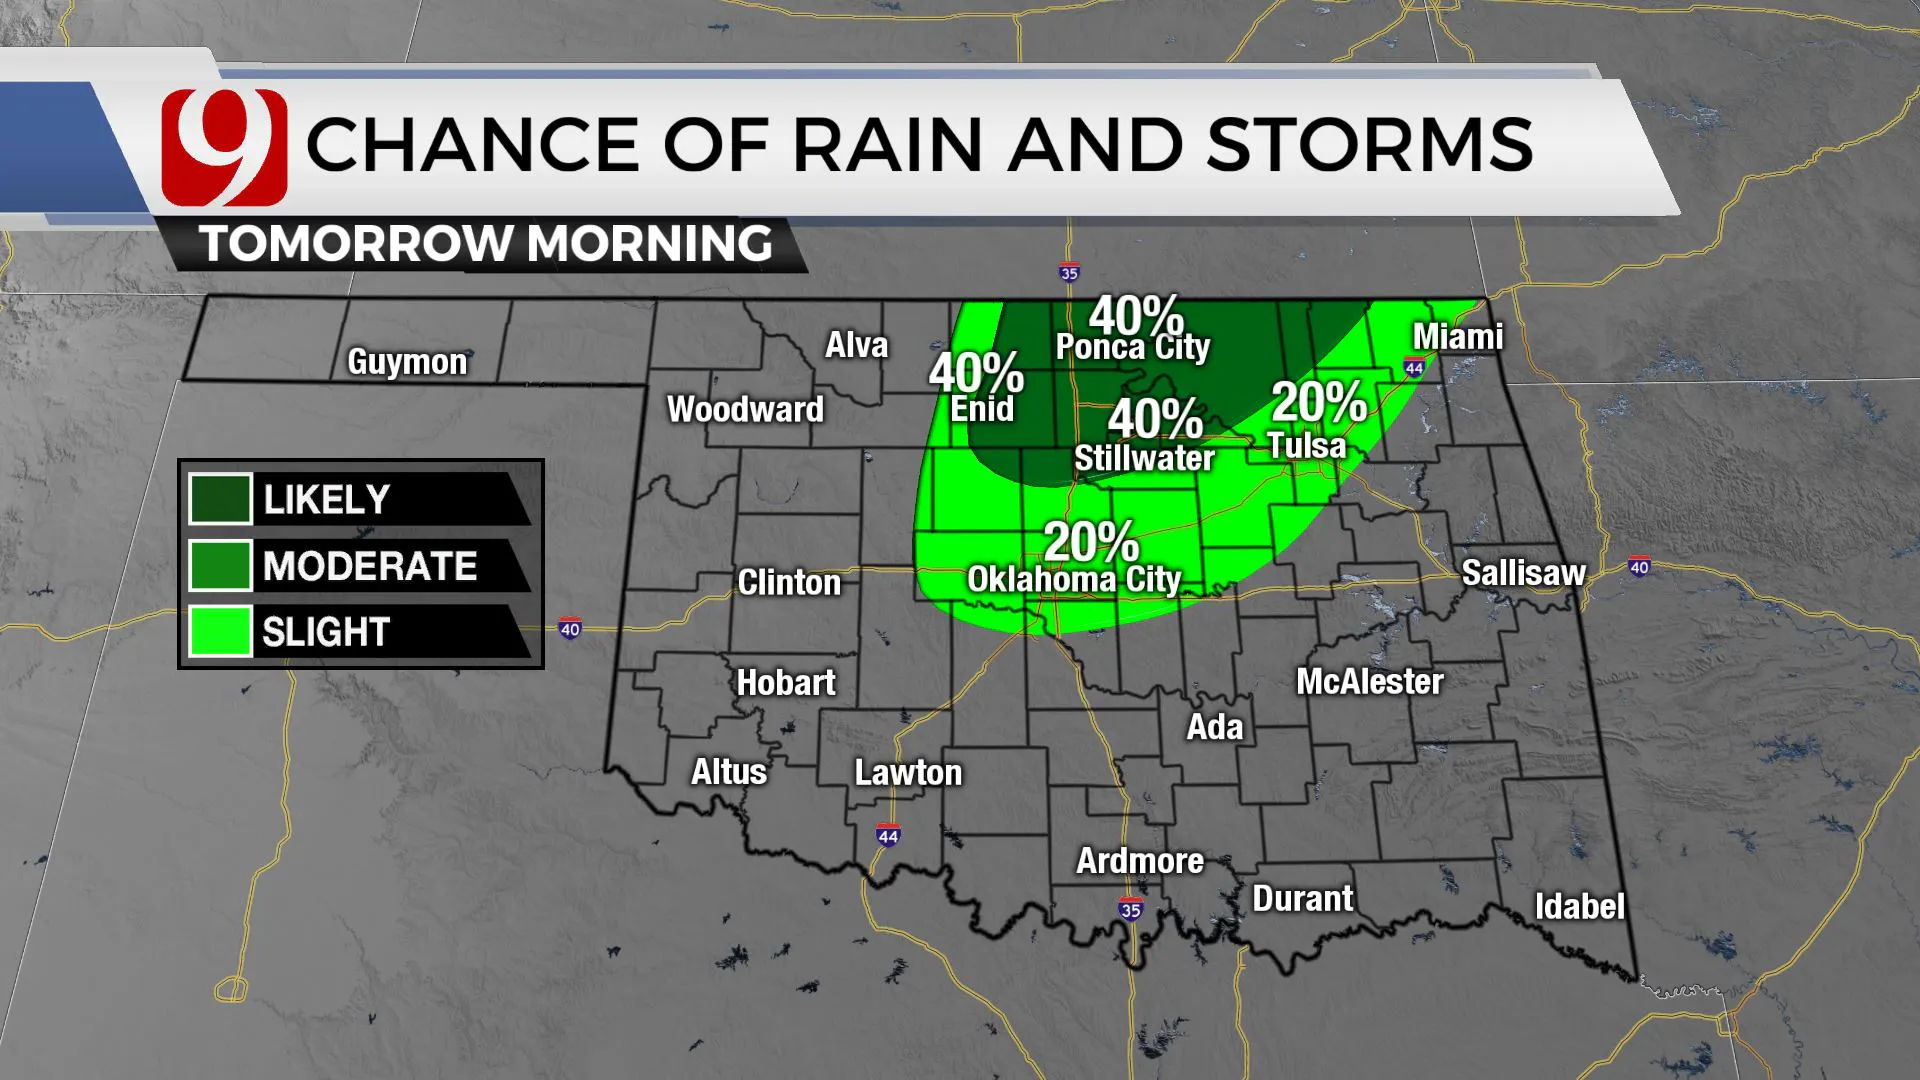 Chances of rain and storms tomorrow morning.